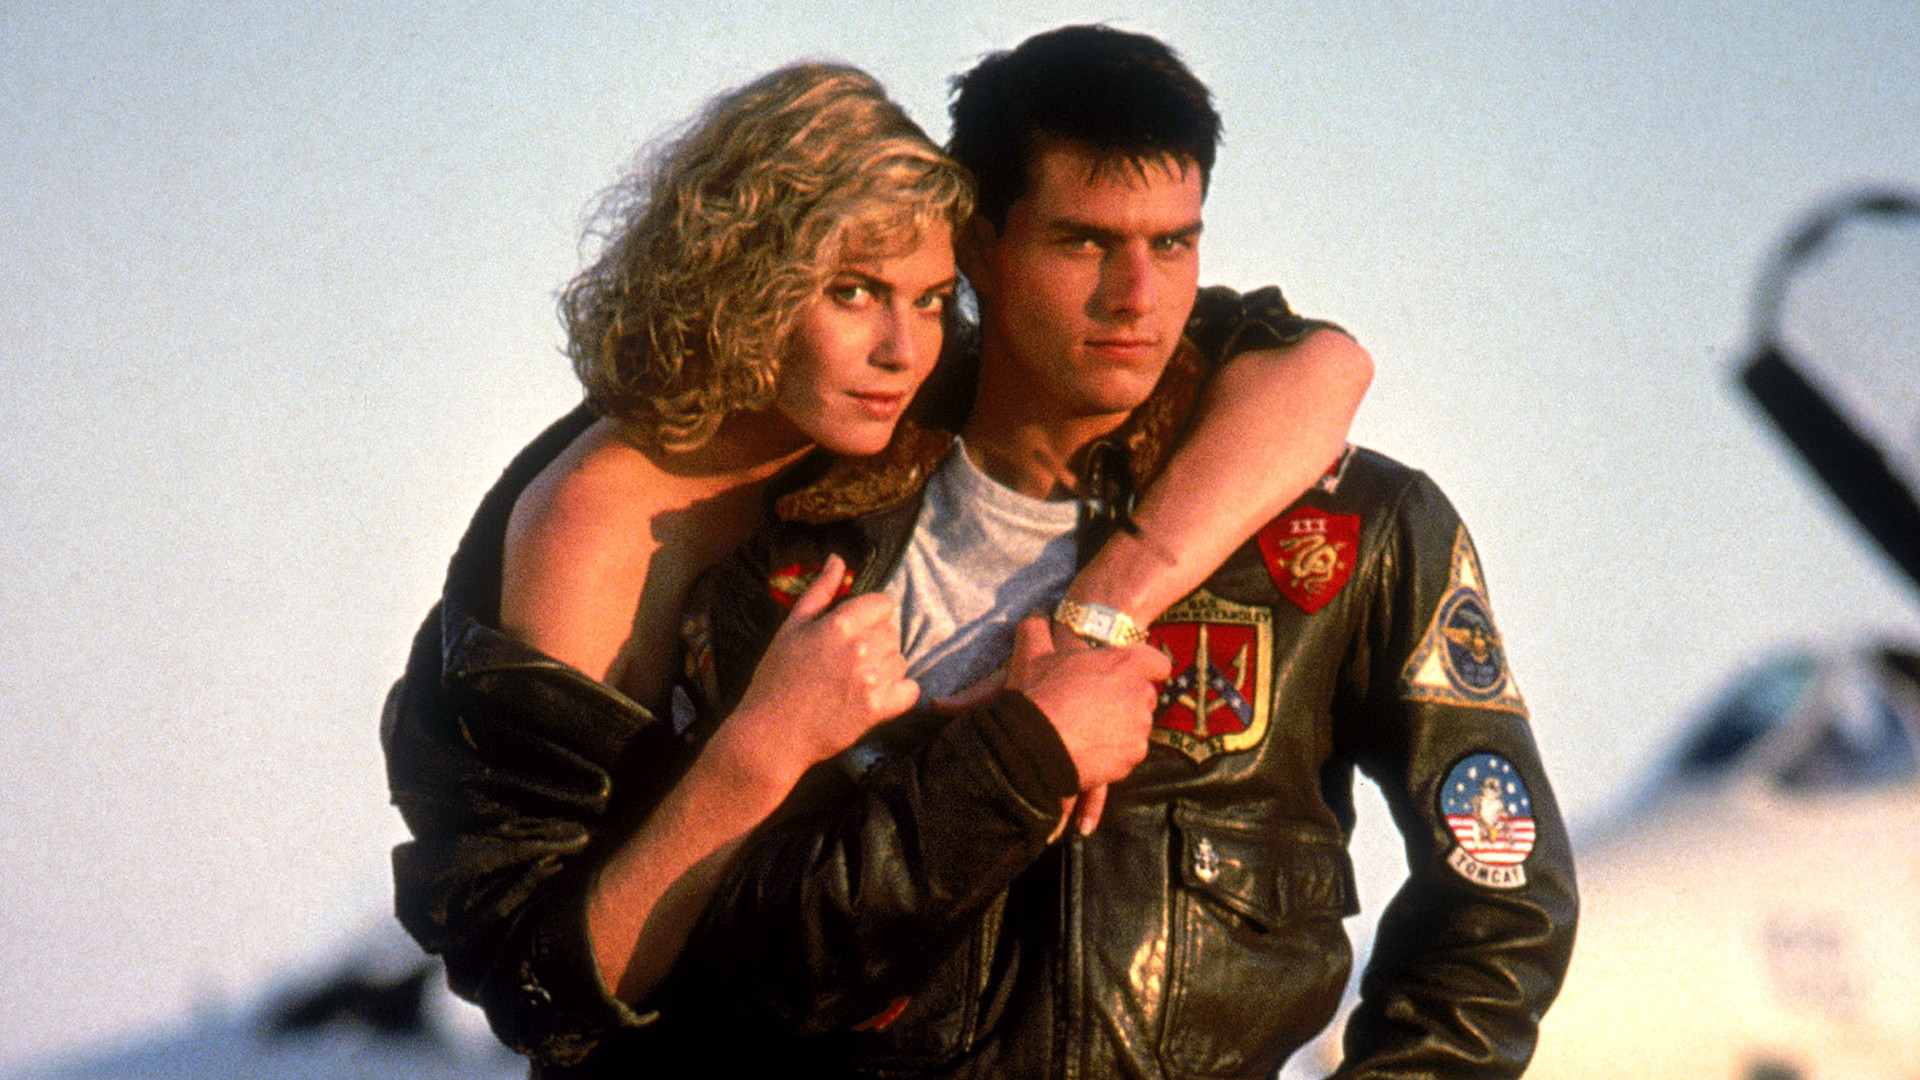 1920x1080 'Top Gun' turns 30: 8 facts about the hit Tom Cruise movie - TODAY.com